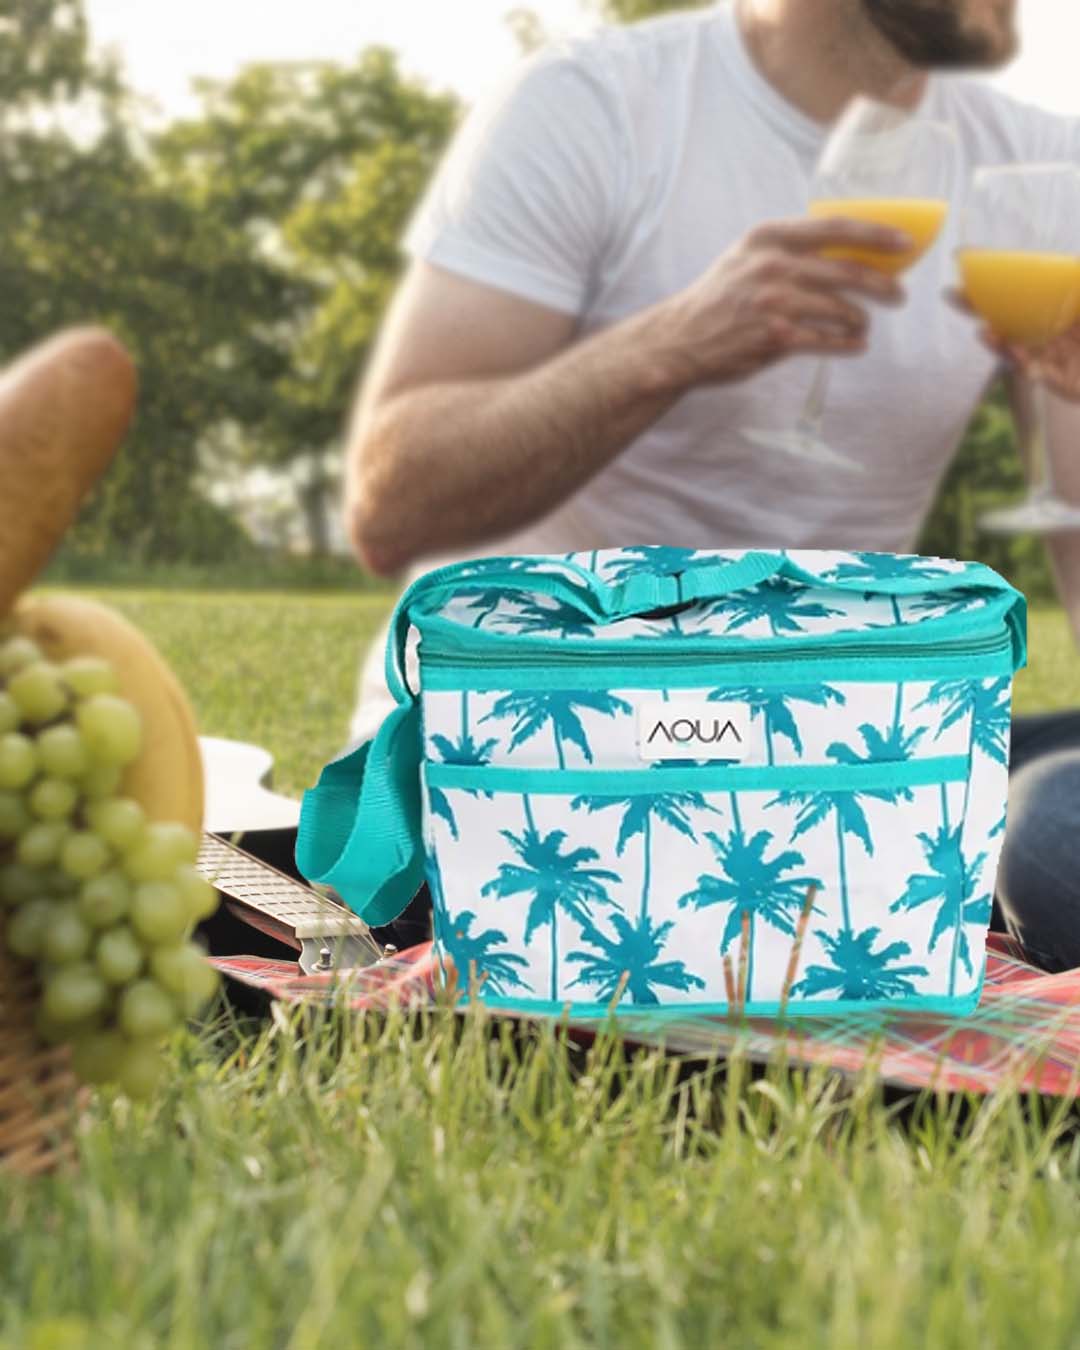 Aqua 5L Insulated Thermal Cooler Lunch Bag 34511